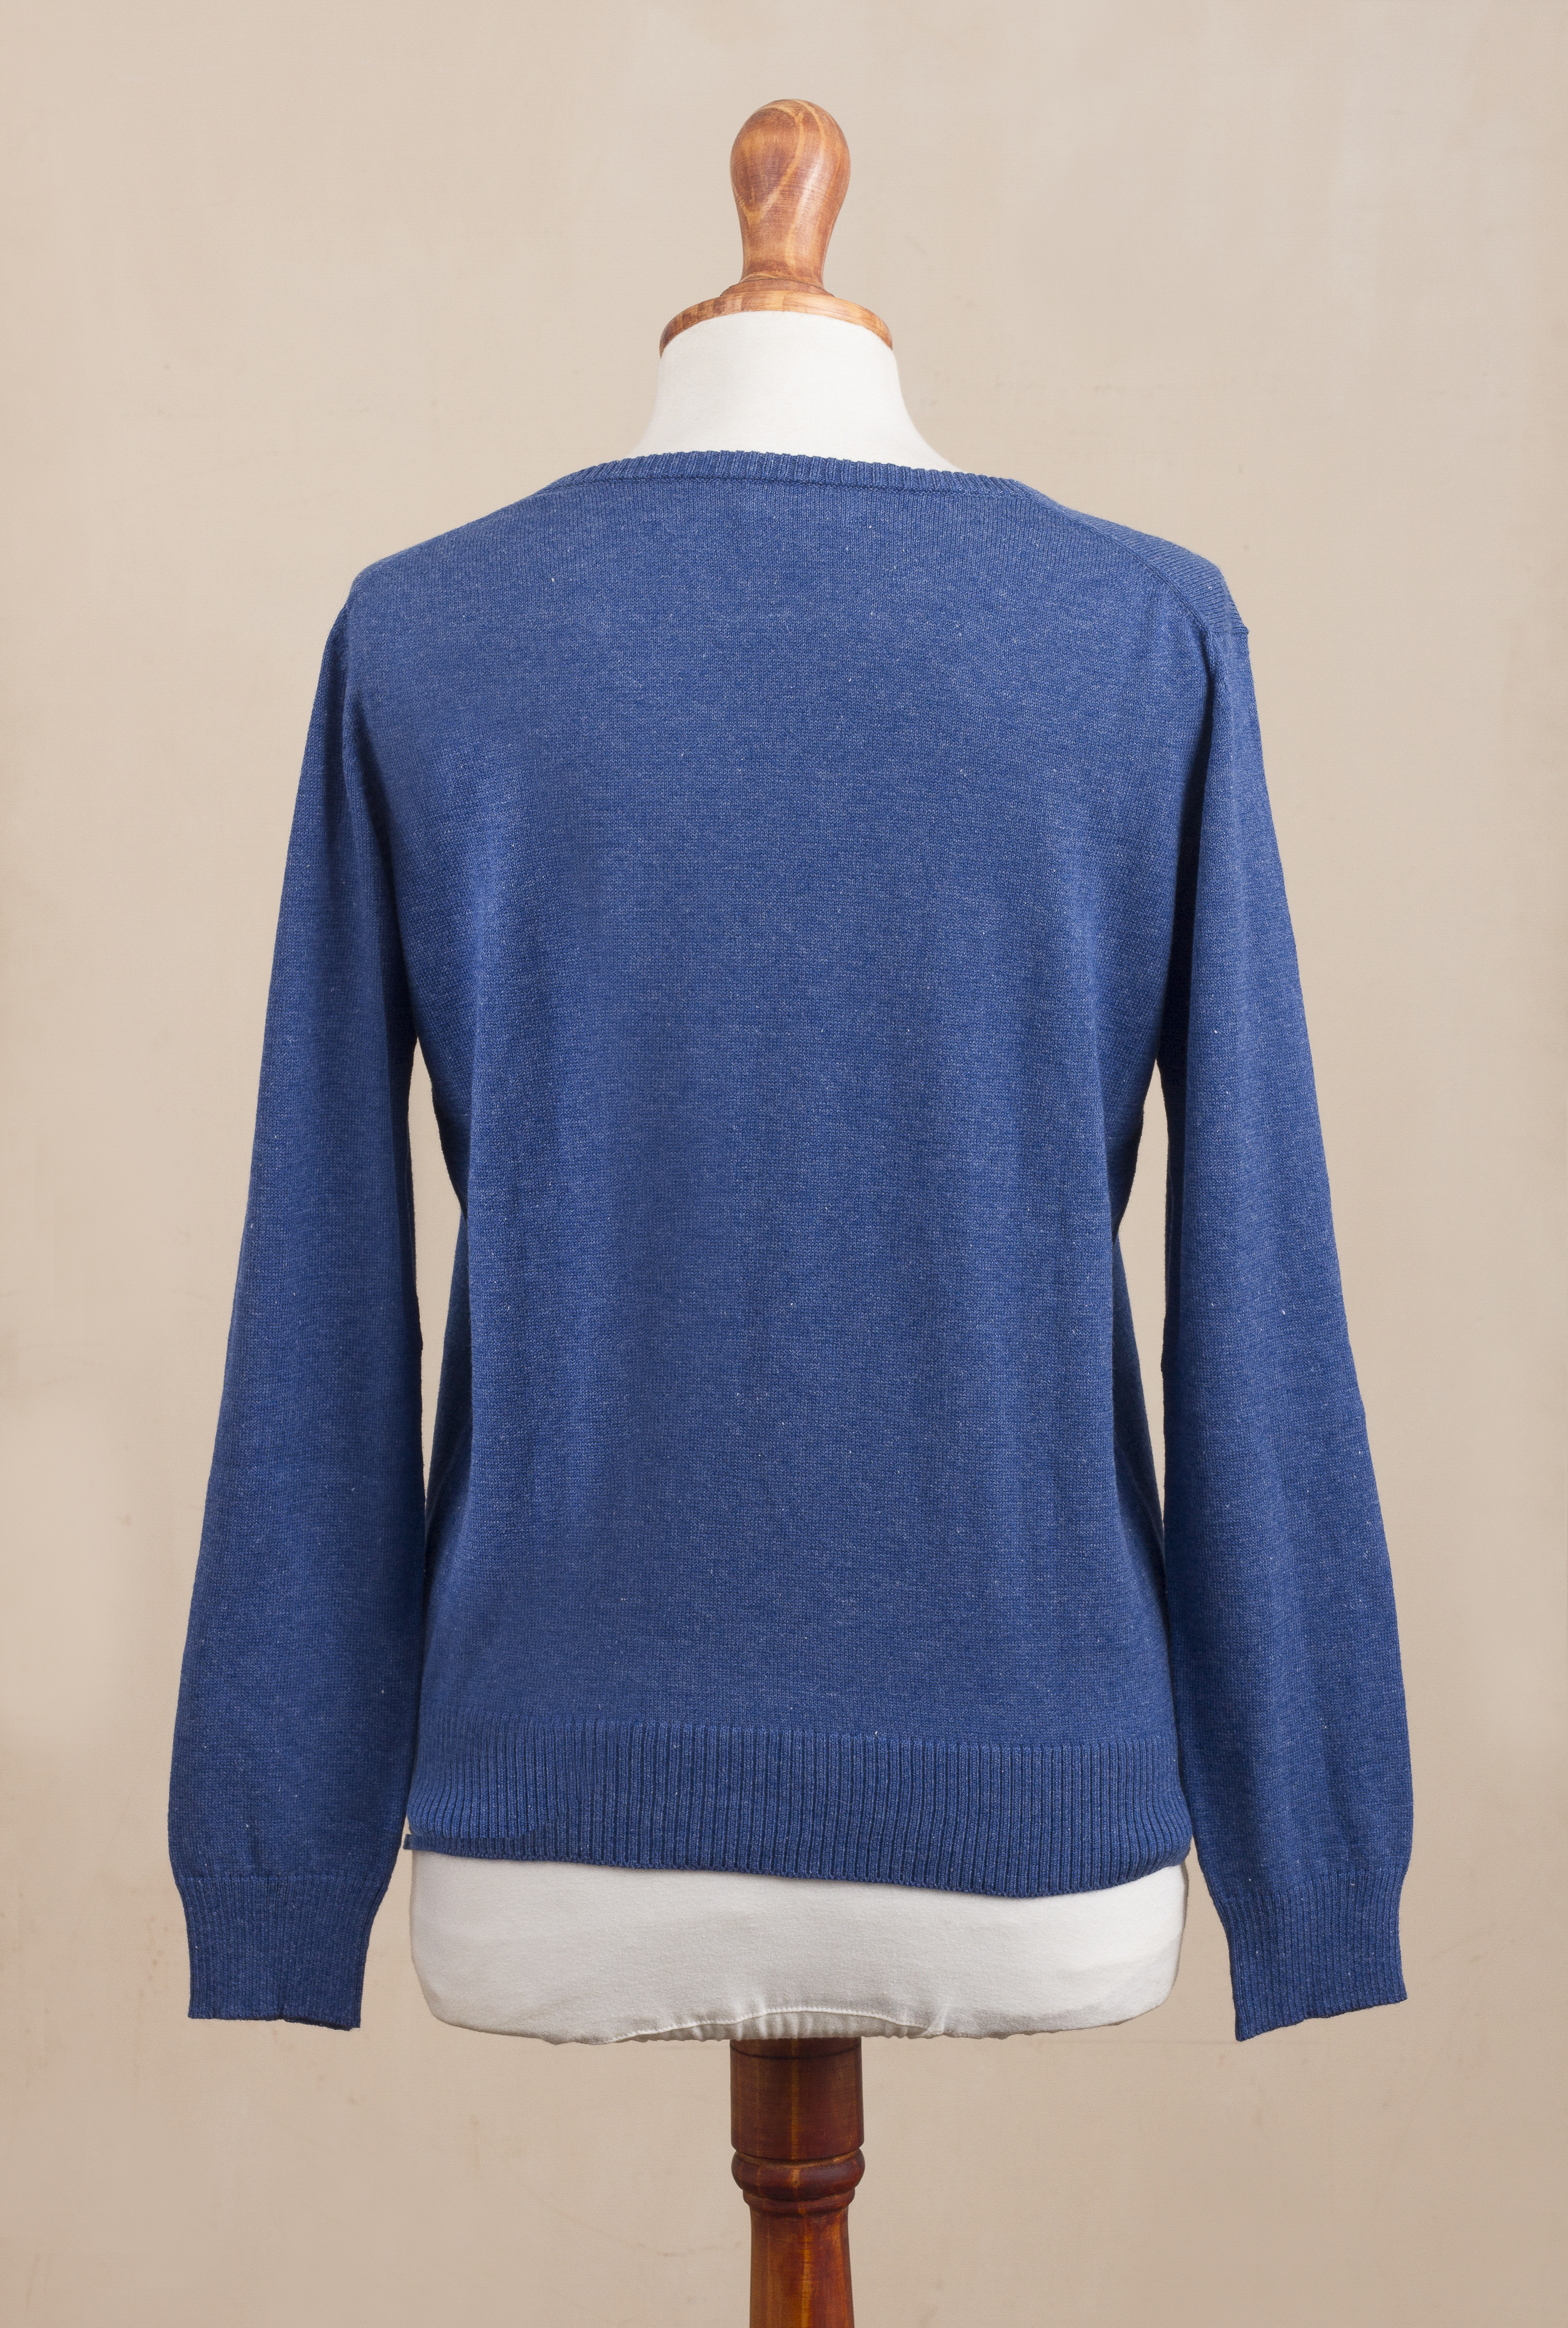 Cotton blend pullover, 'Warm Valley in Royal Blue' - Knit Cotton Blend Pullover in Royal Blue from Peru